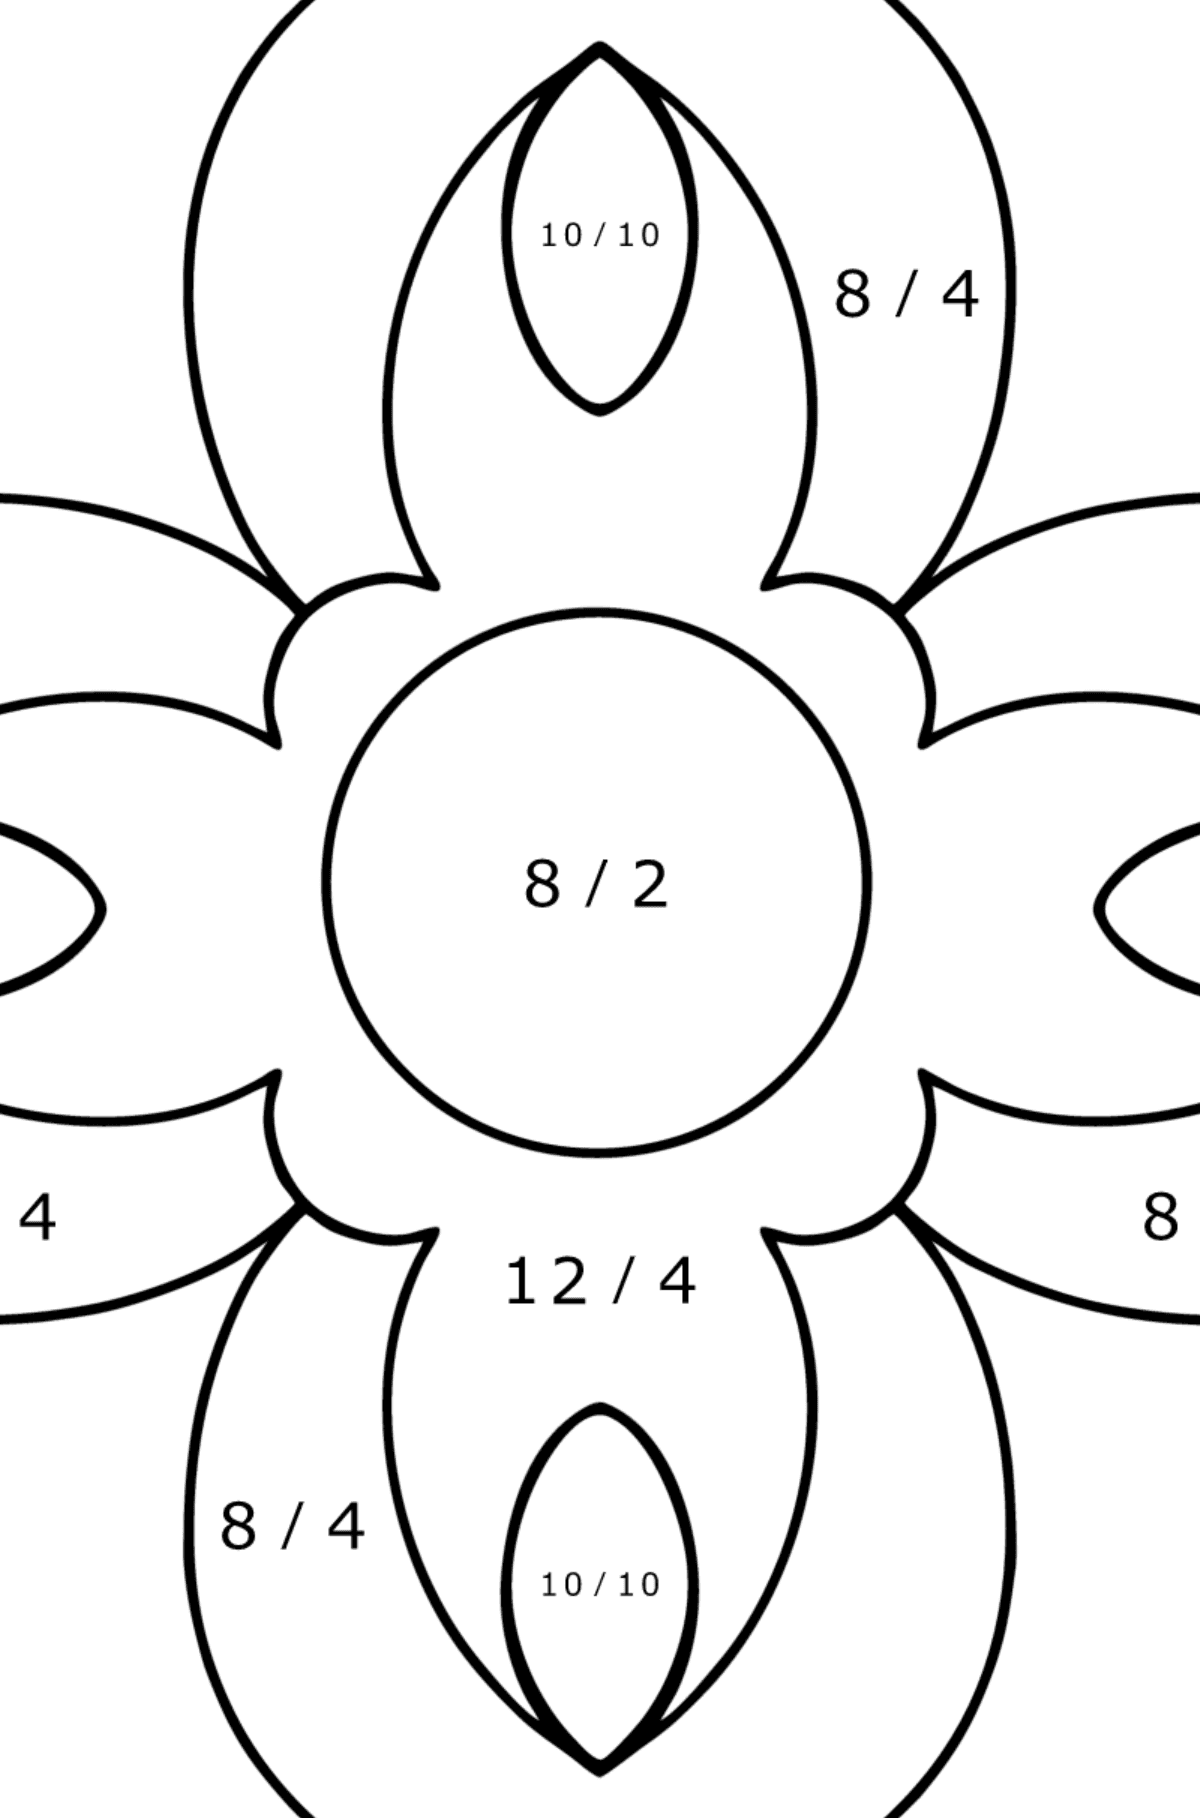 Coloring book for kids - Anti stress flower - Math Coloring - Division for Kids